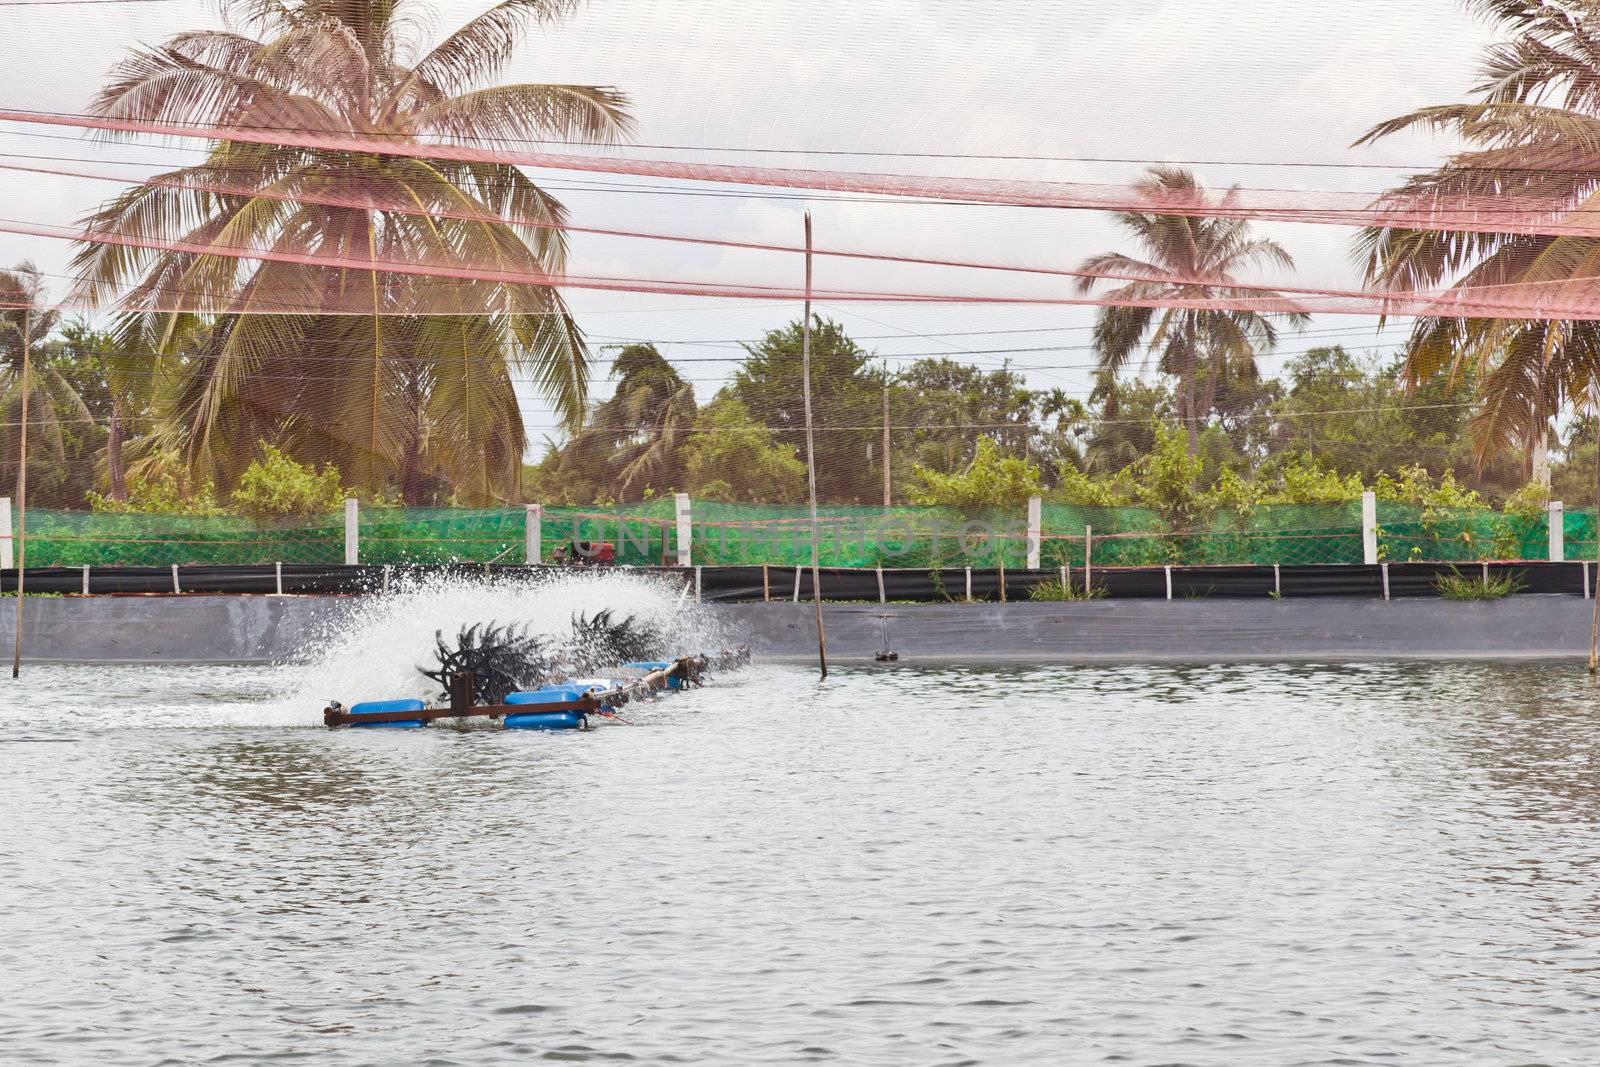 Water treatment of Shrimp Farms covered with nets for protection by FrameAngel